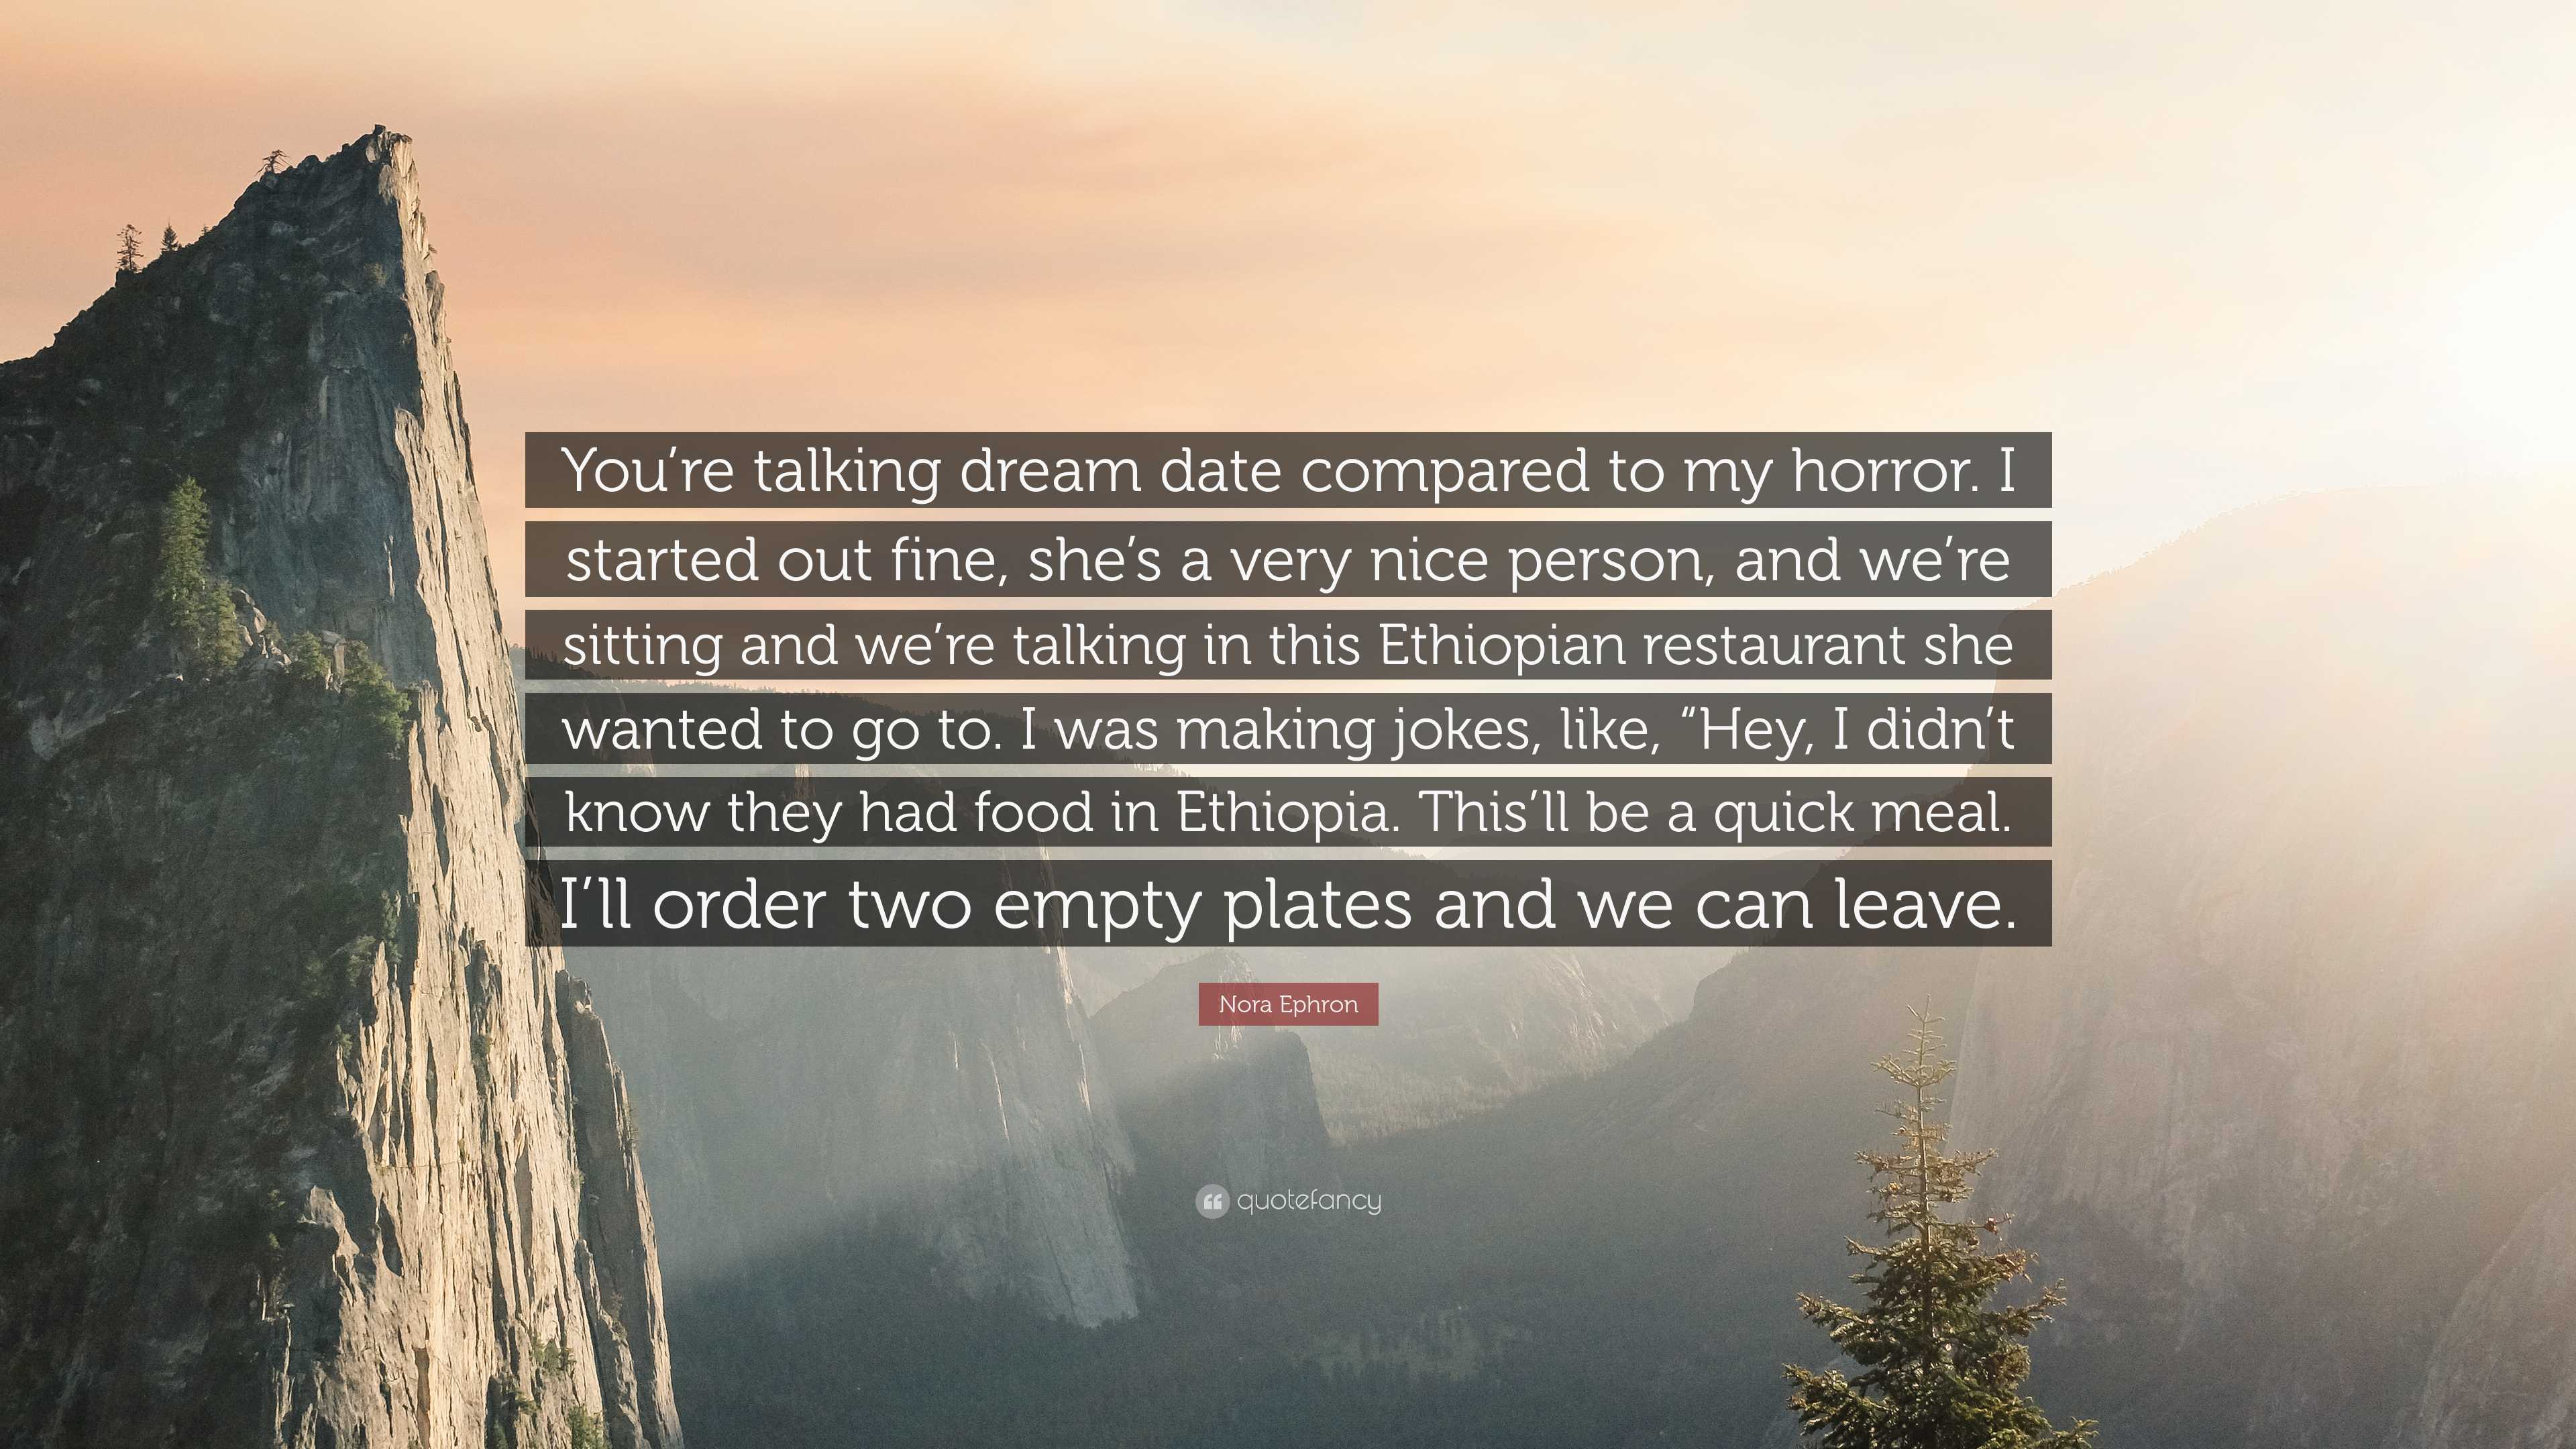 Nora Ephron Quote: “You're talking dream date compared to my horror. I  started out fine, she's a very nice person, and we're sitting and we'”